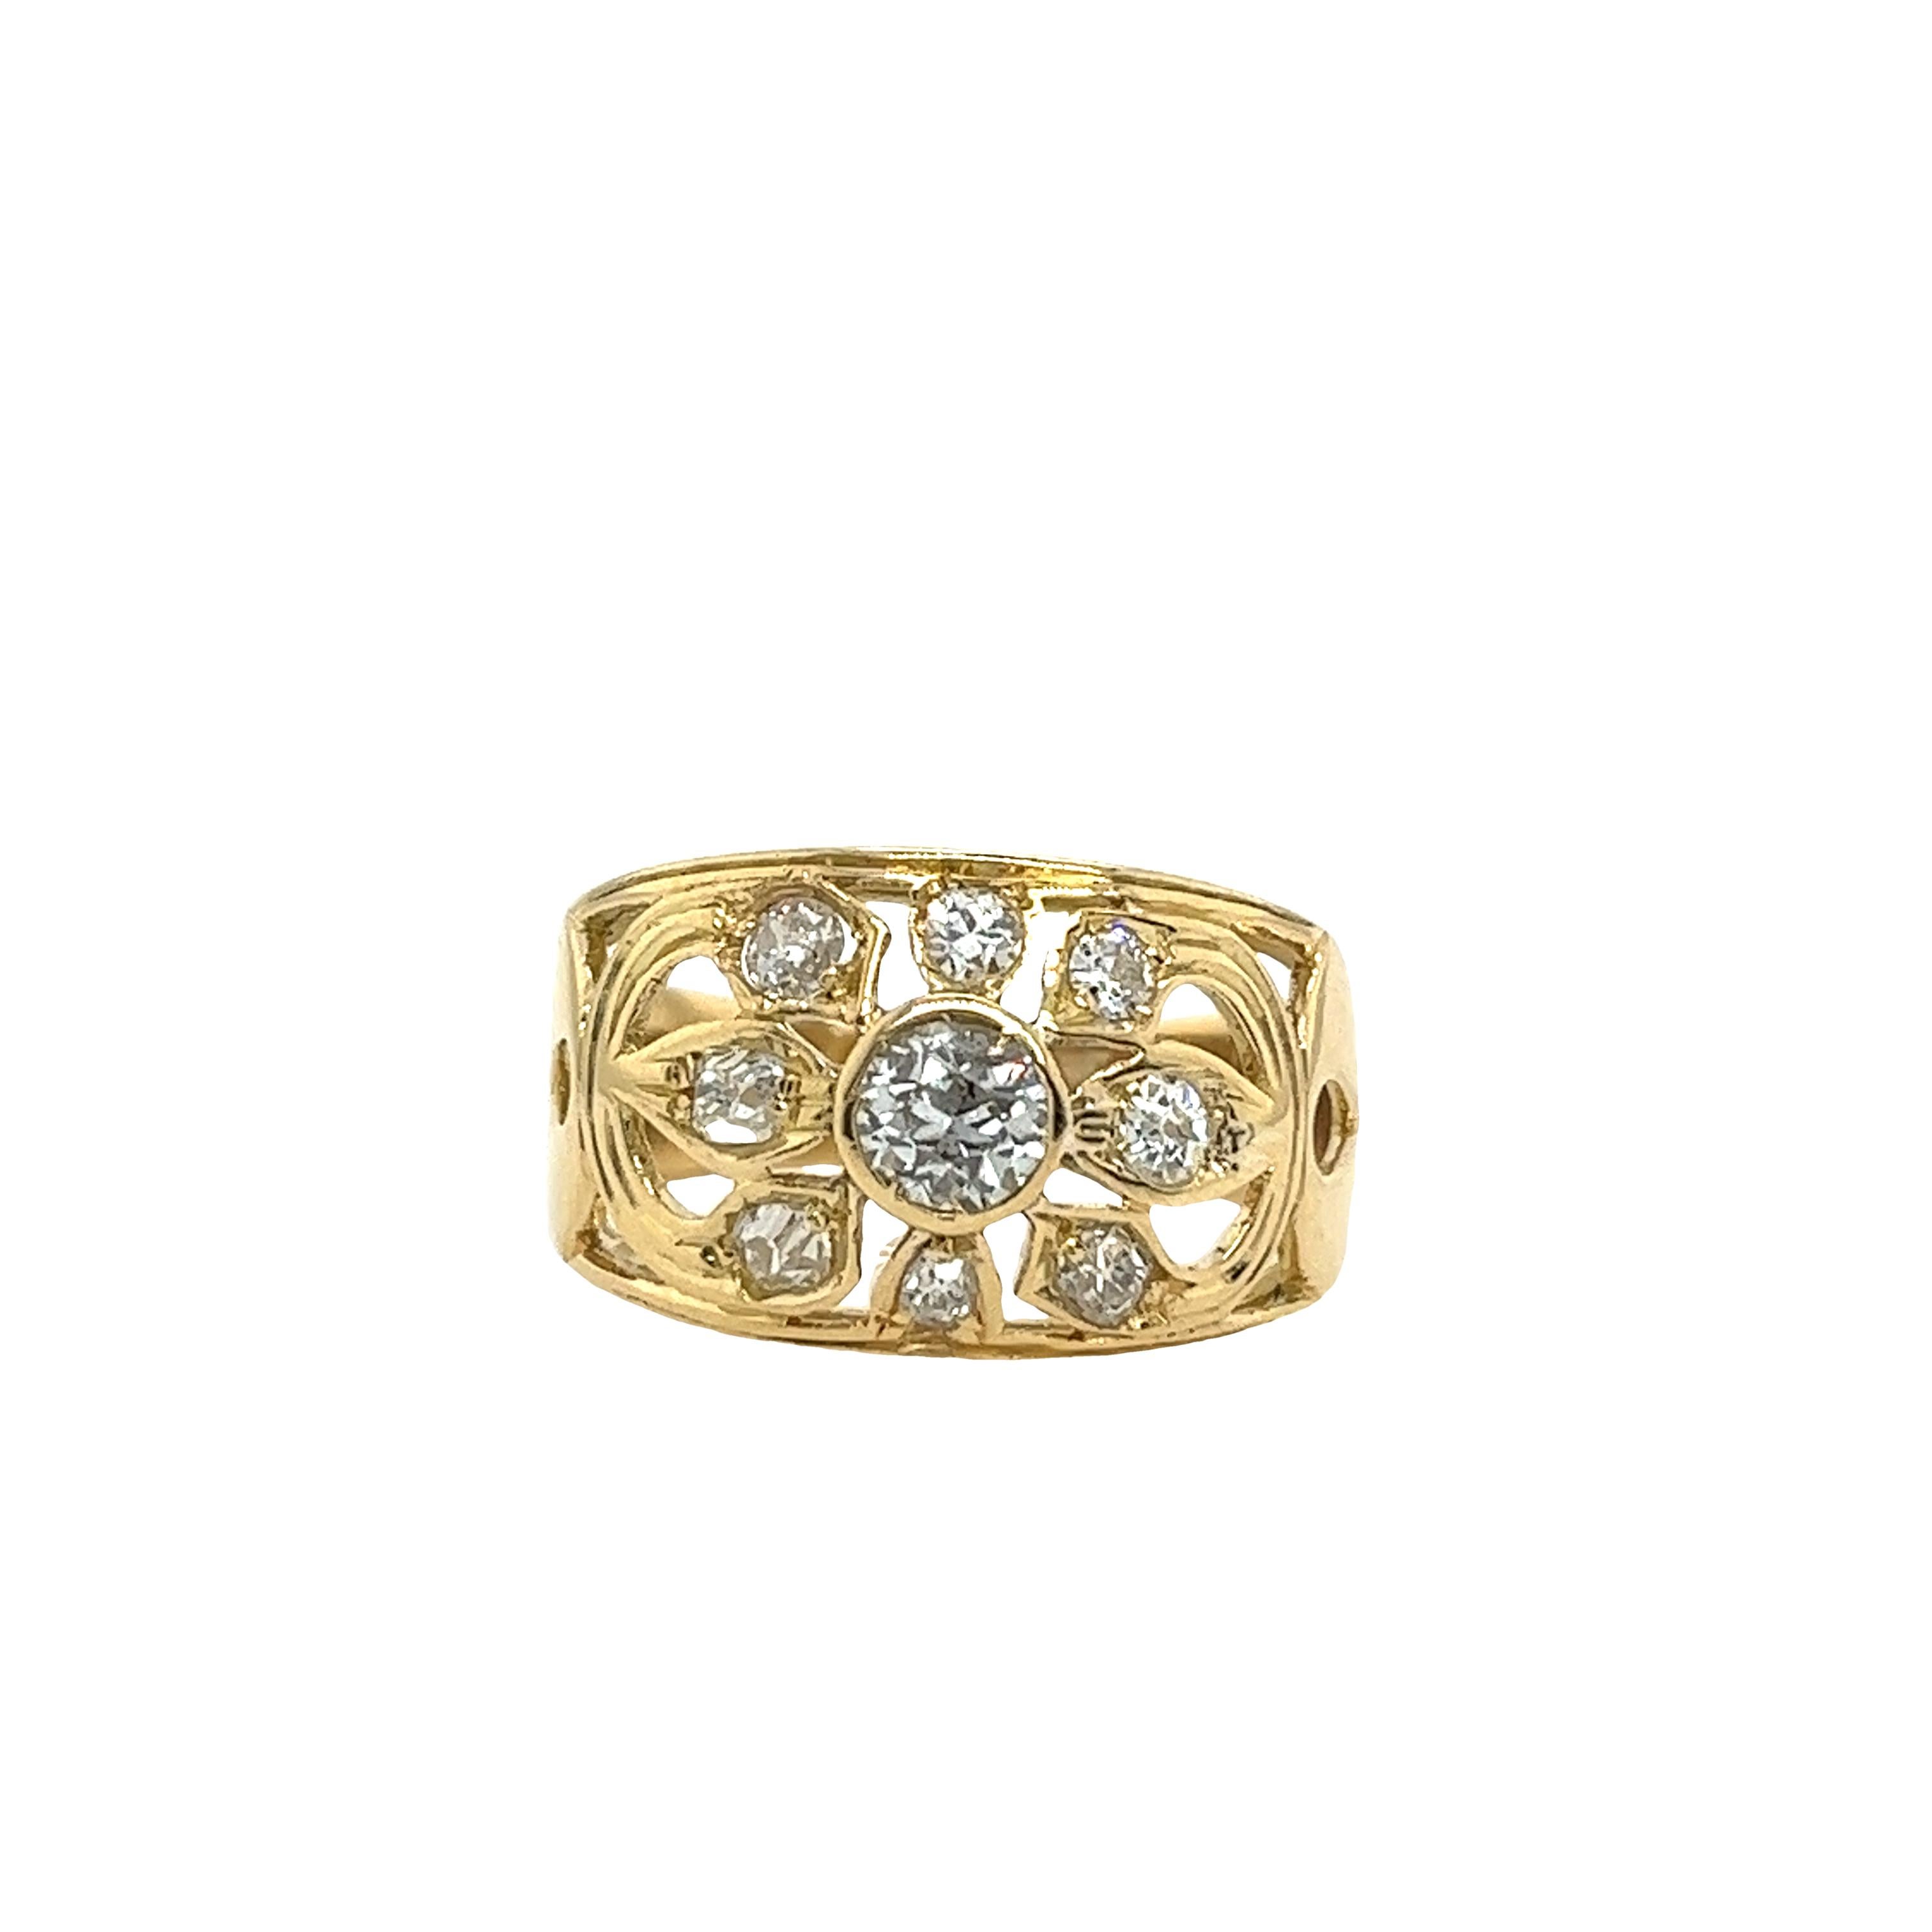 This gorgeous diamond dress ring set in an 14ct yellow gold setting, 
with 0.60ct natural old cut diamonds. This is a unique and eye-catching ring.
Total Diamond Weight: 0.60ct
Diamond Colour: H-I
Diamond Clarity: SI1/SI2
Total Weight: 6.4g
Width of